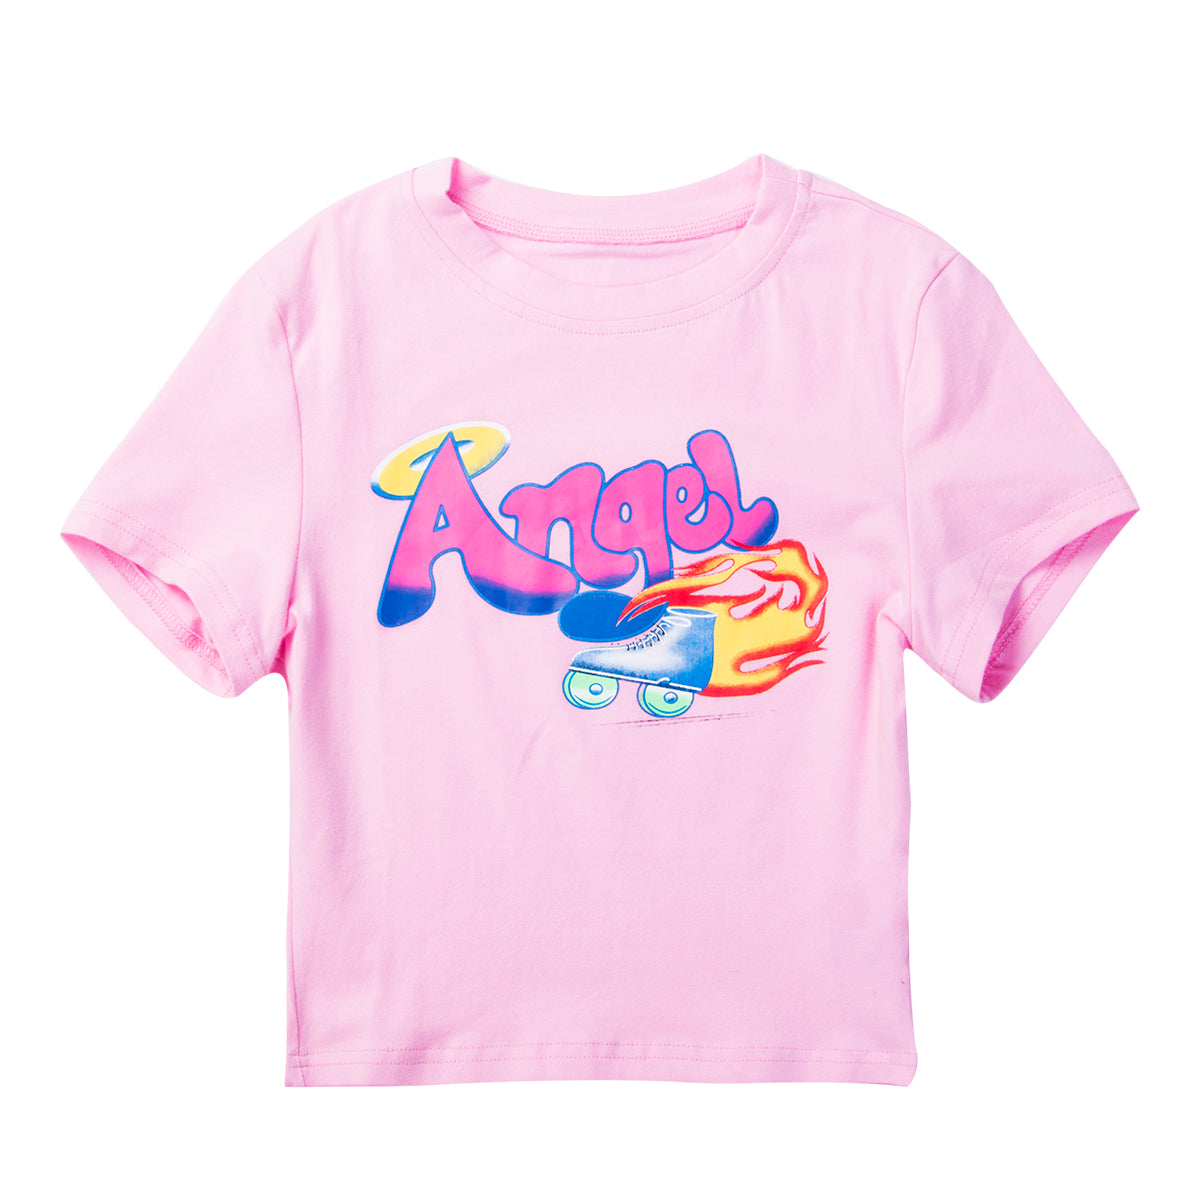 Angels Aesthetic Graphic Tees - t shirt store near me, Clothfusion Tees